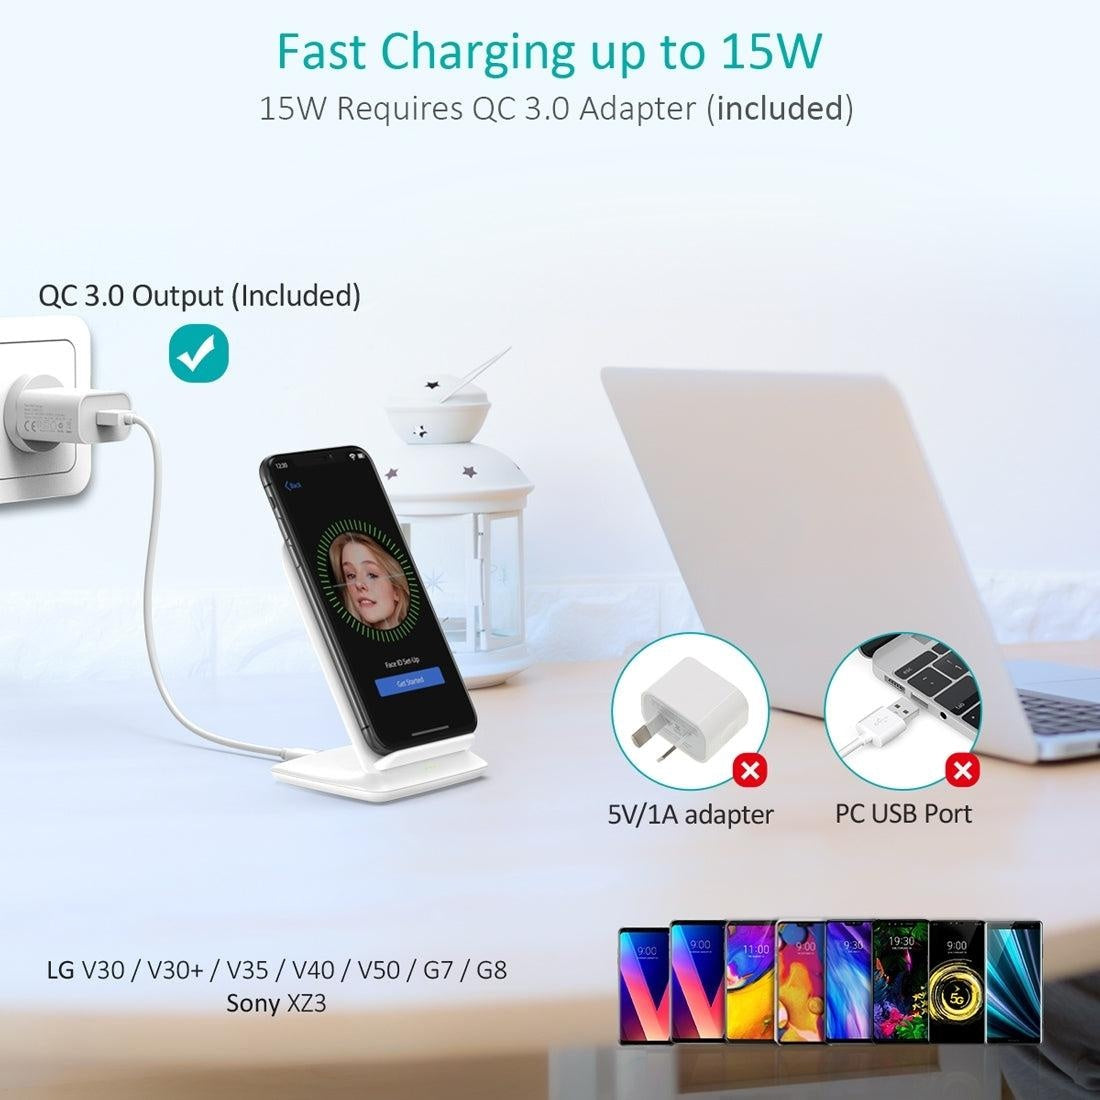 CHOETECH T555-F 15W Wireless Charger Stand with AC Charger (White) Deals499